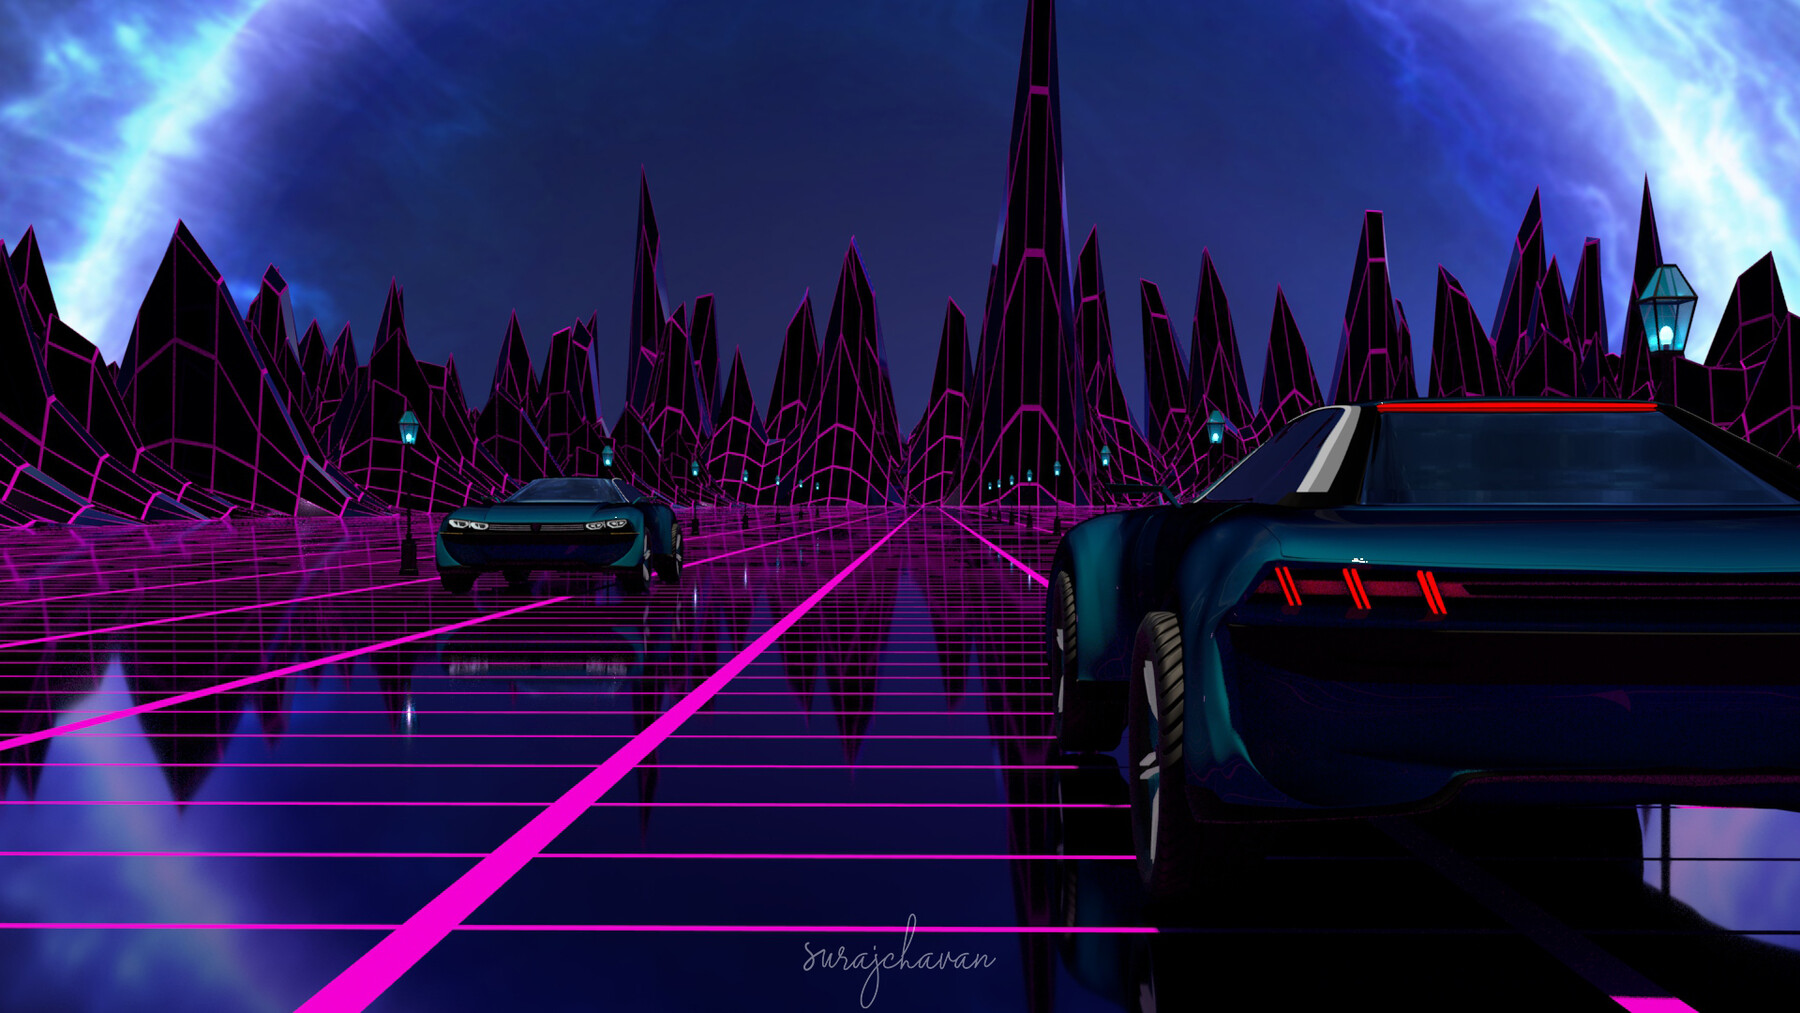 CAR ( Peugeot E Legend Concept With Cyber Background )